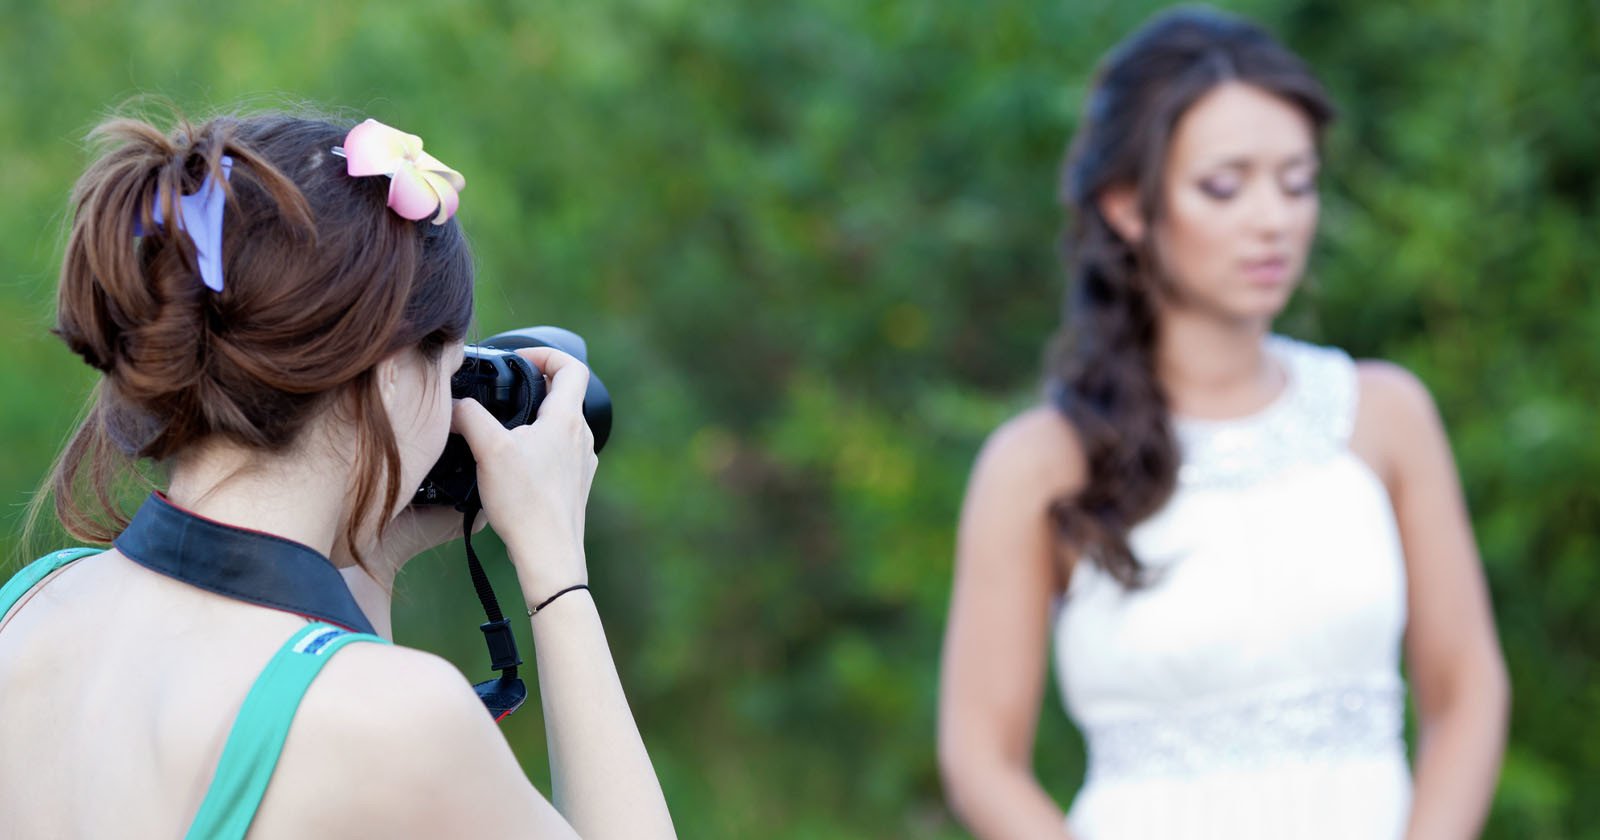 Officials Warn About Wedding Photographer Who Never Shows Up